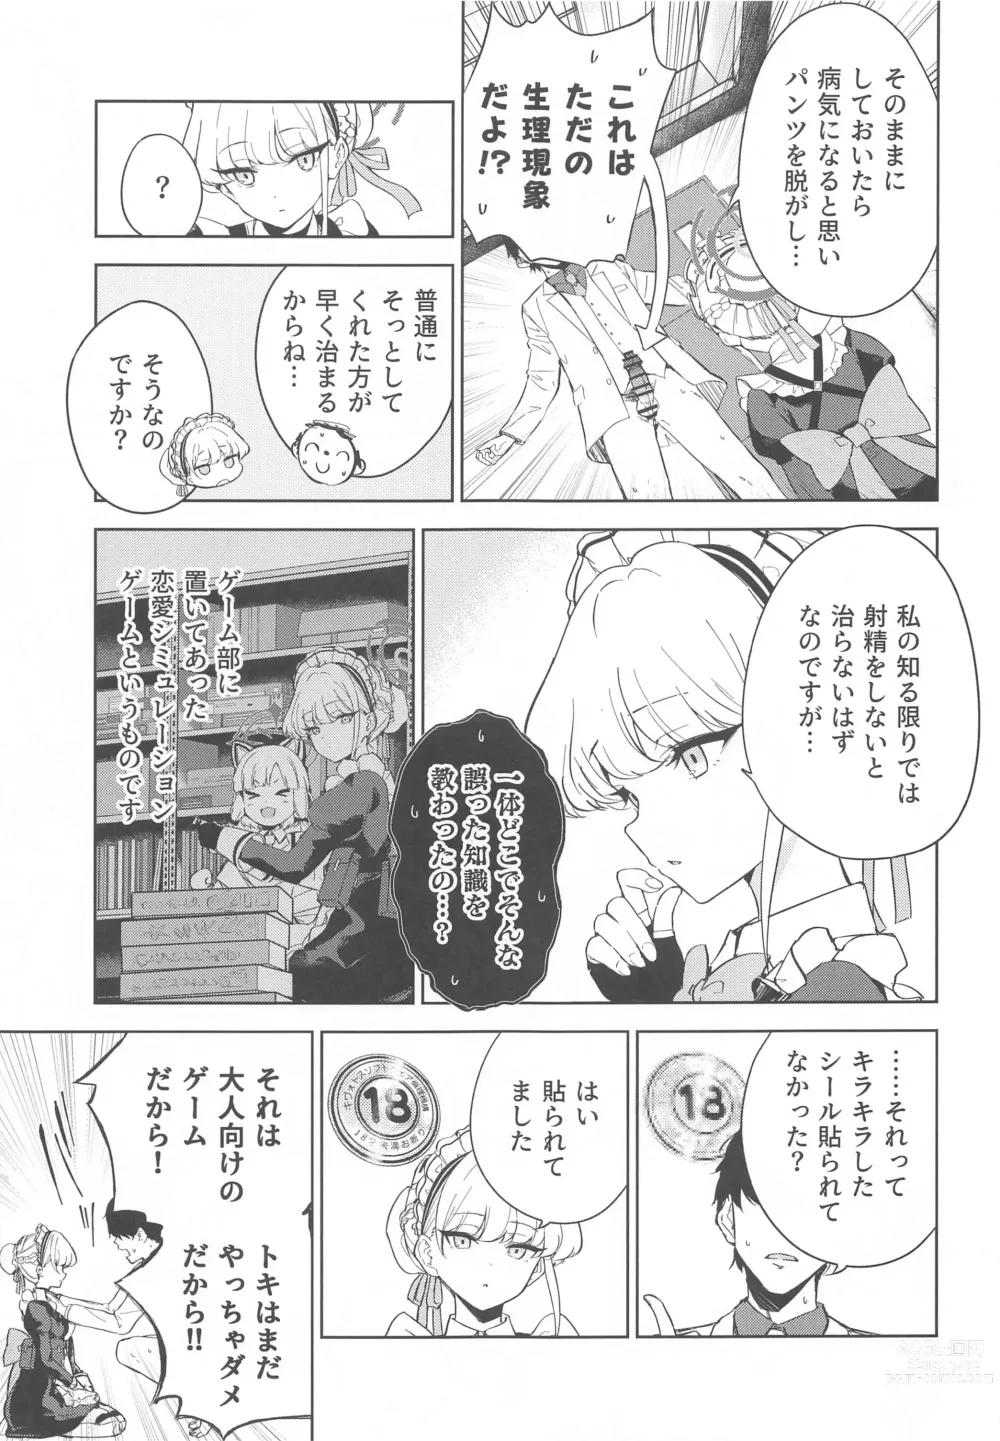 Page 4 of doujinshi Made in Maid